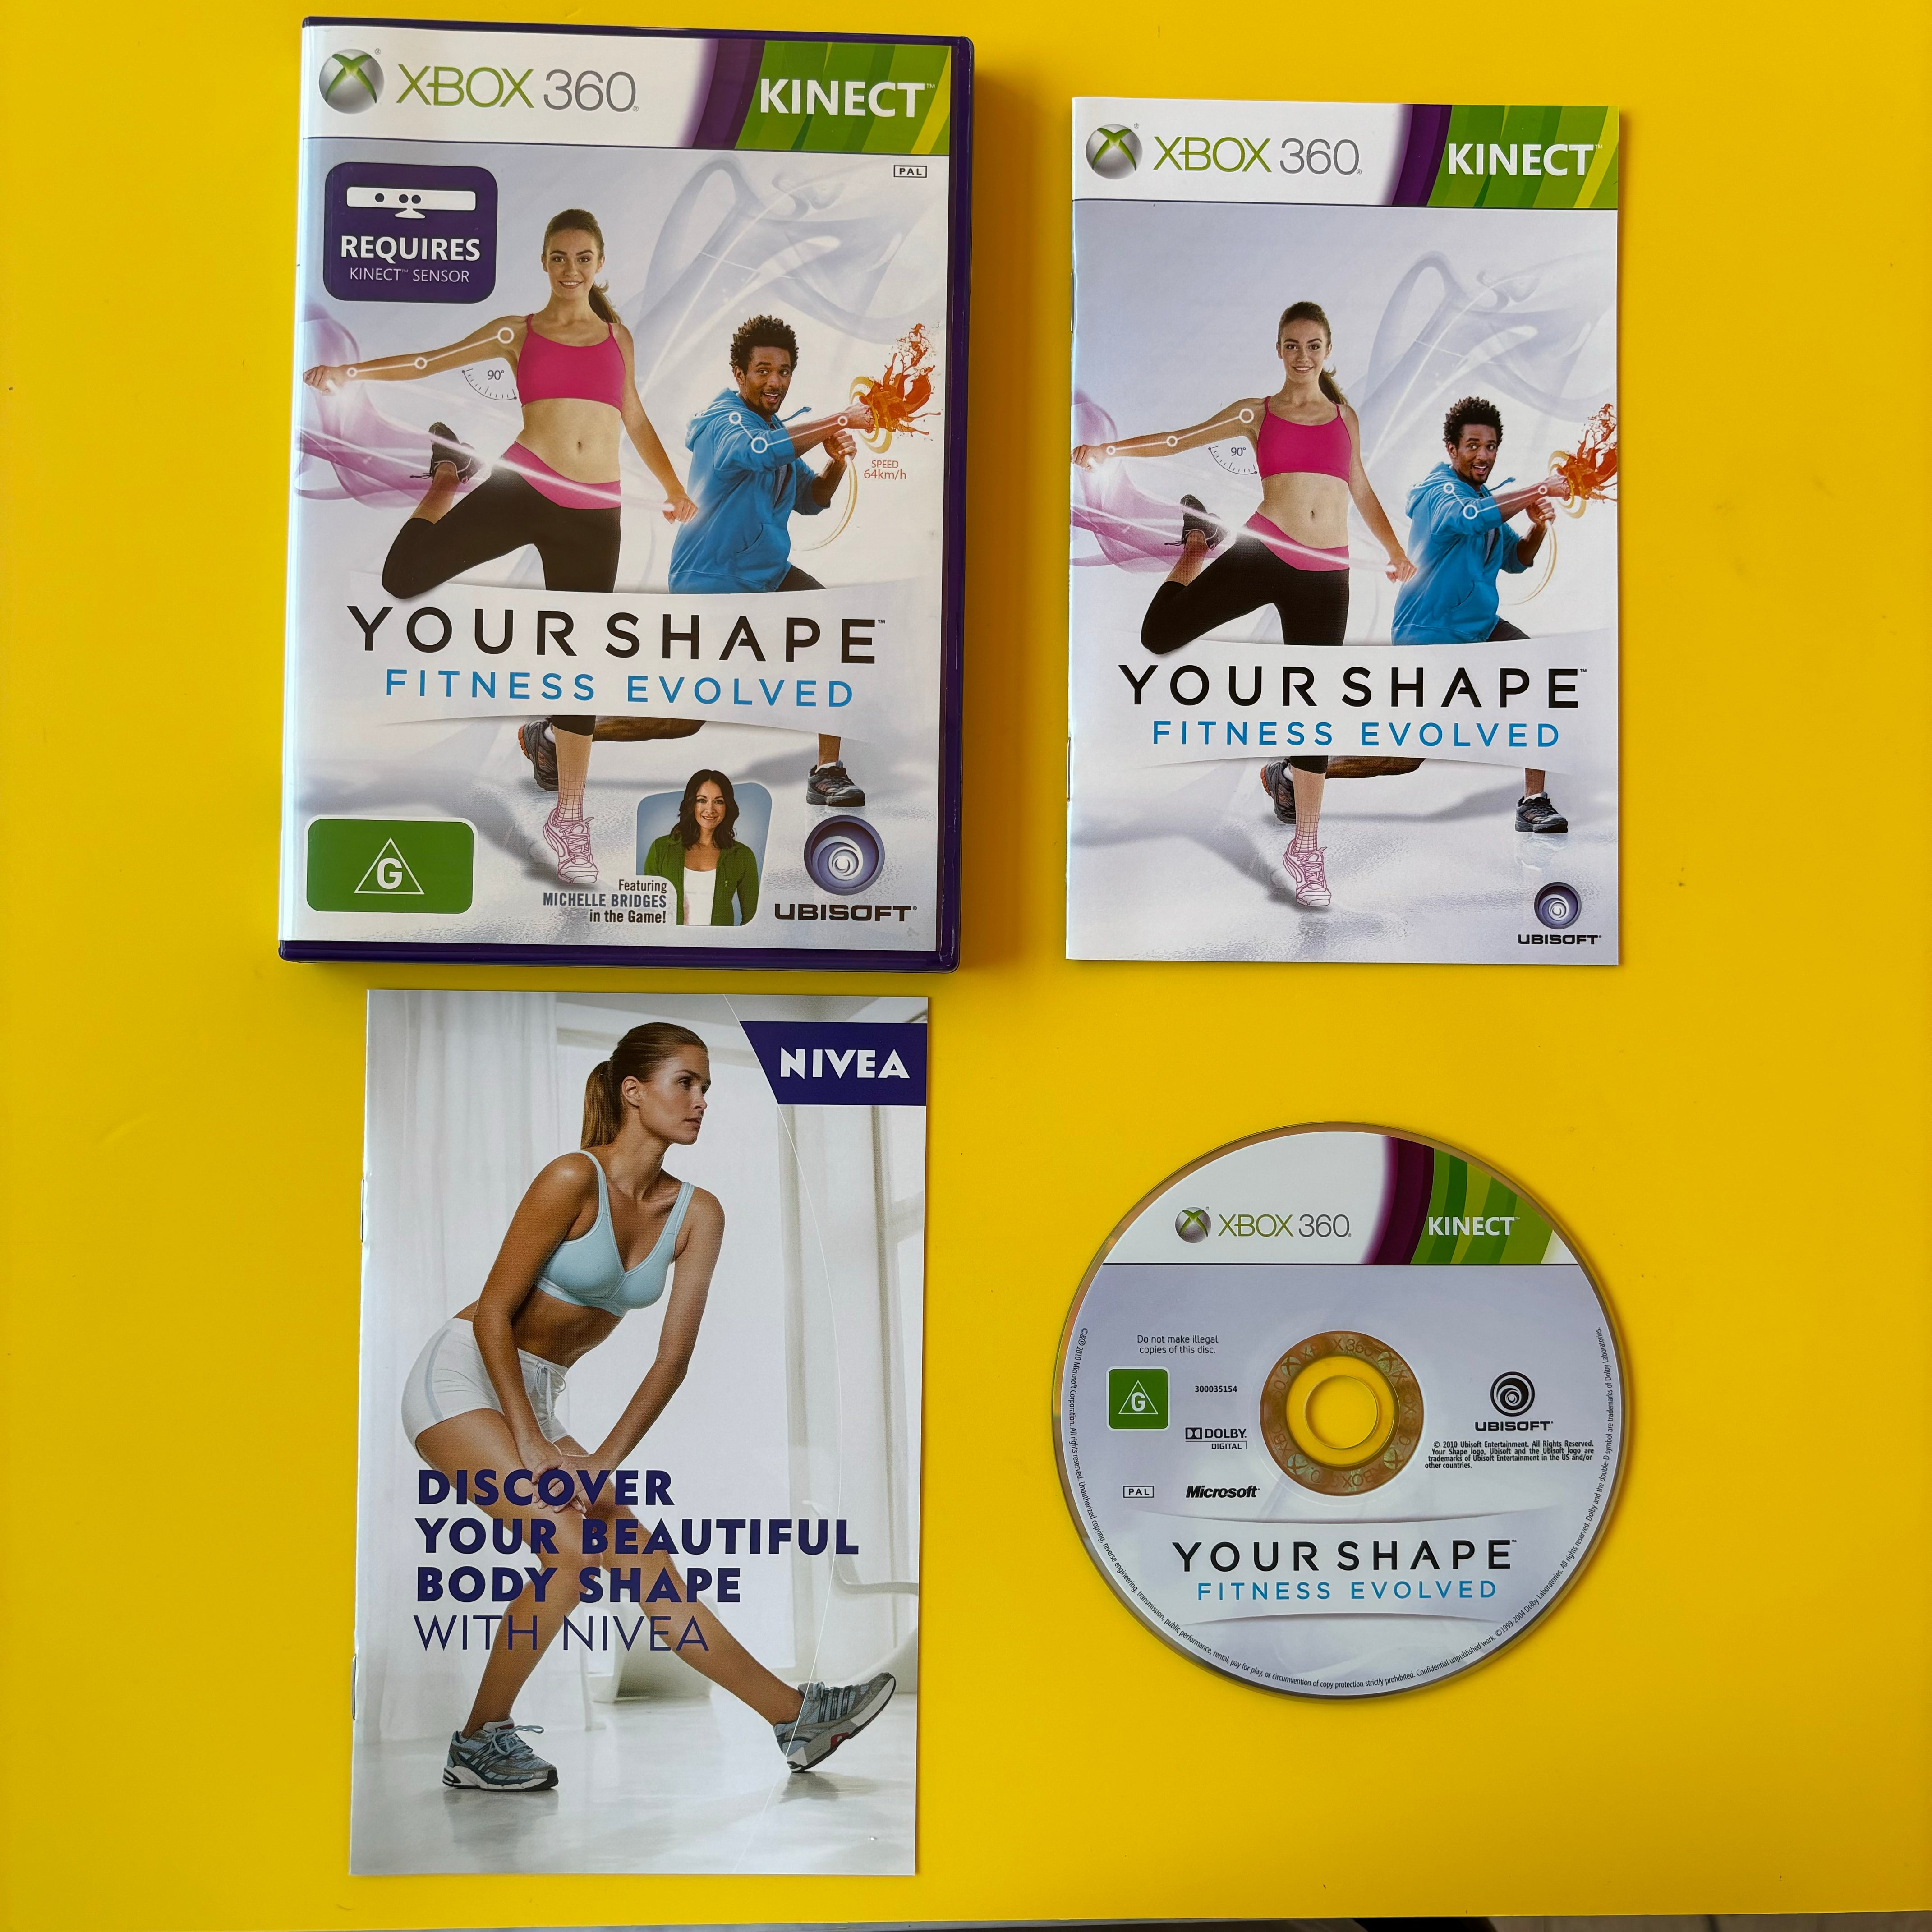 Xbox 360 - Your Shape Fitness Evolved